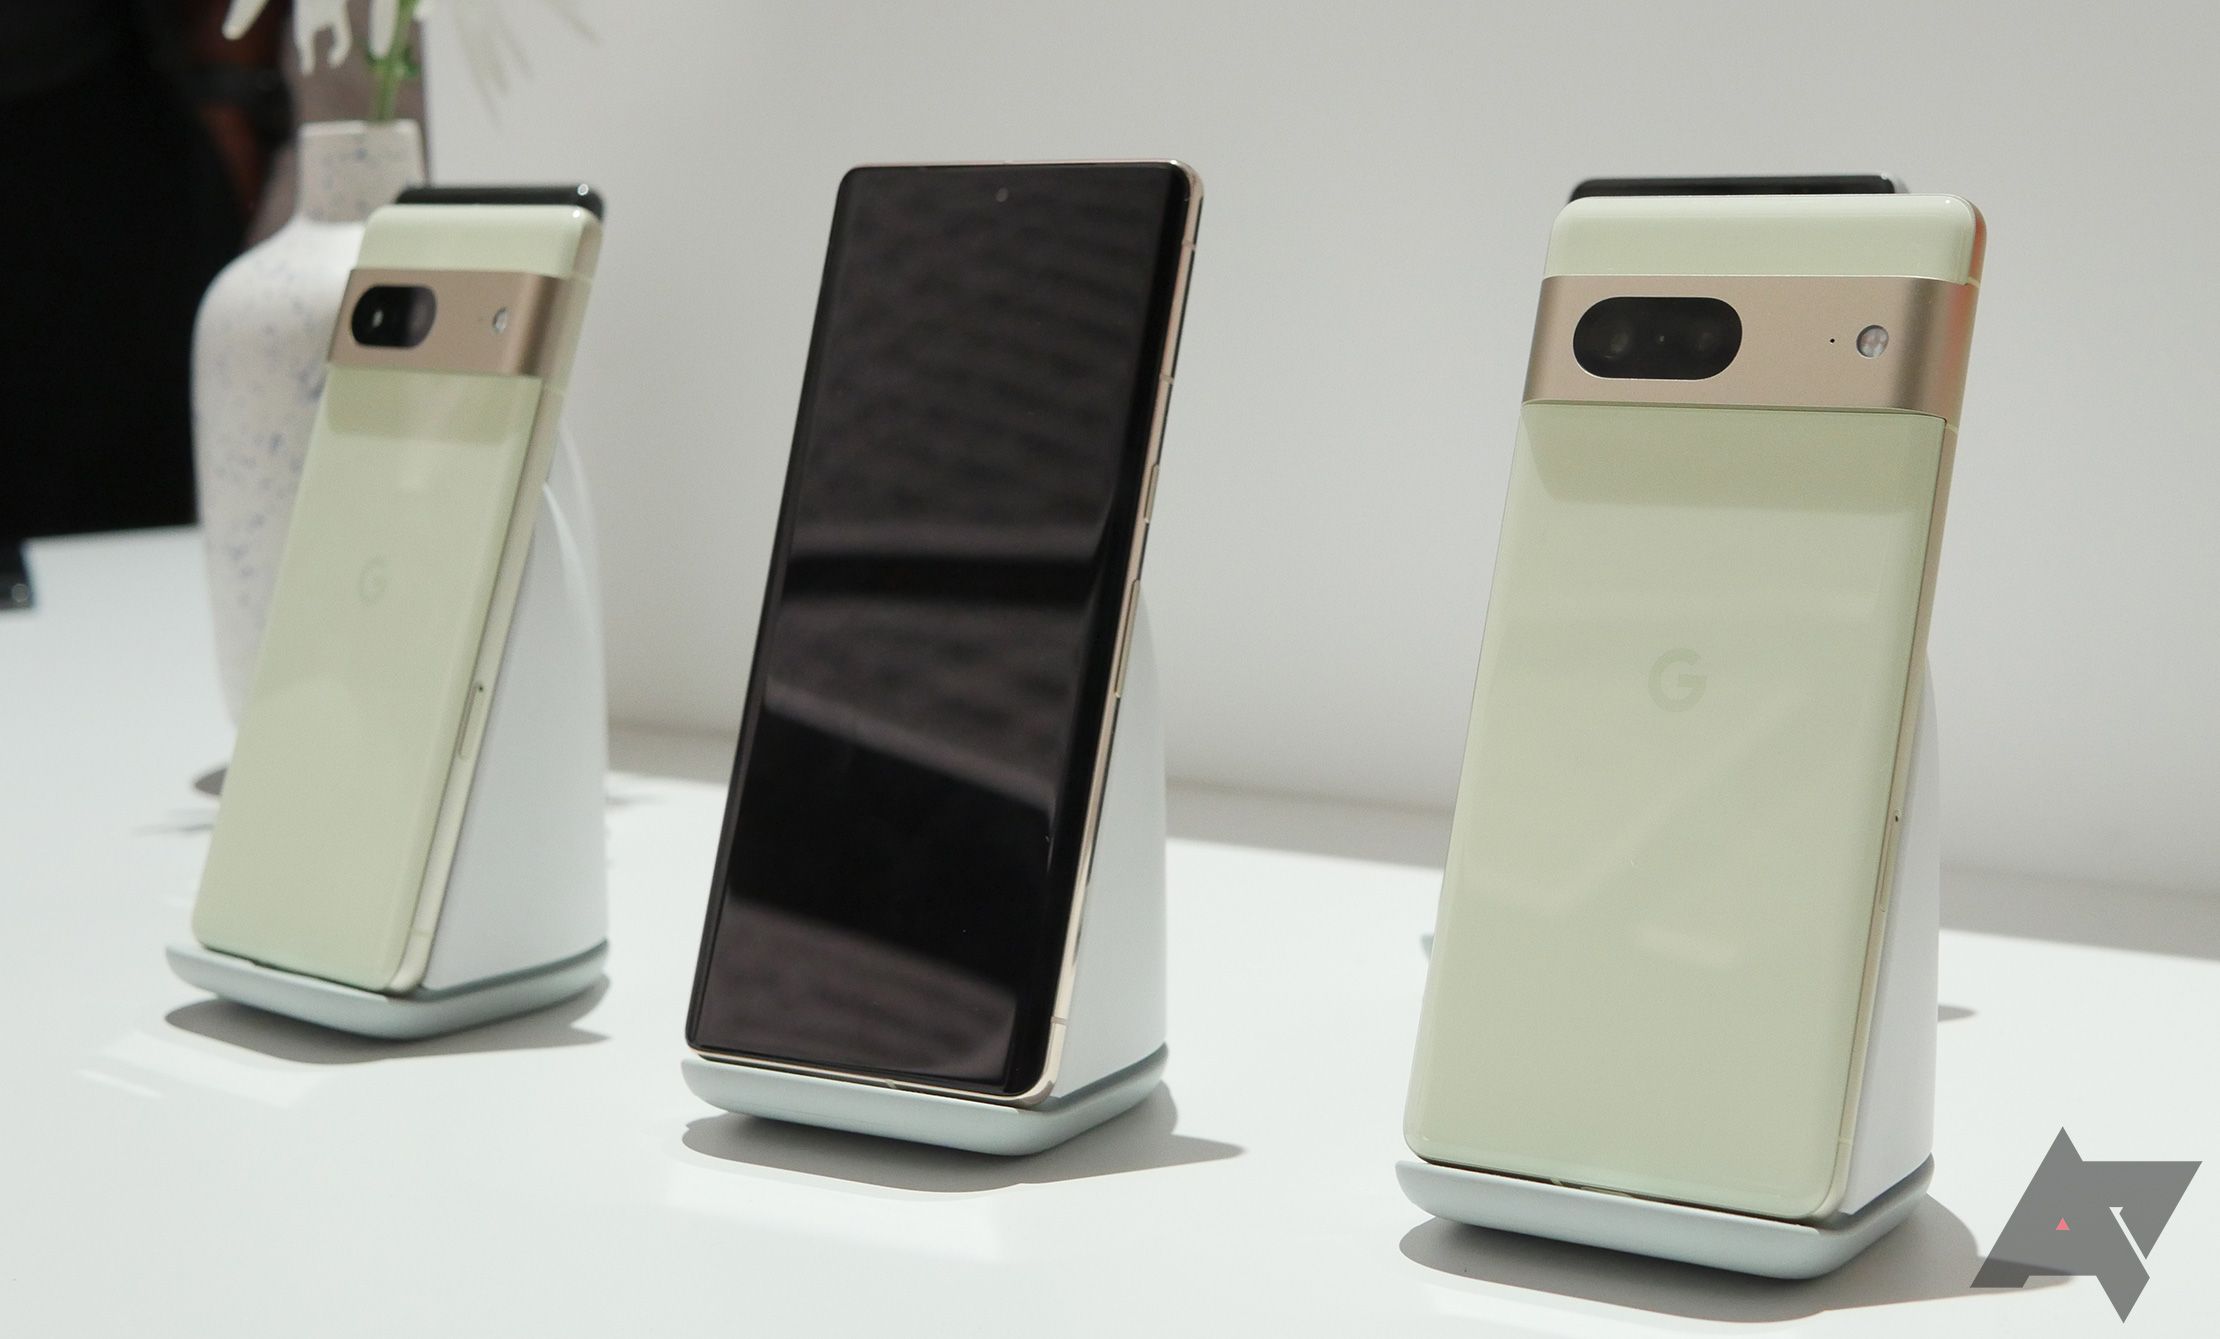 The Google Pixel 7 lemongrass being displayed at a store